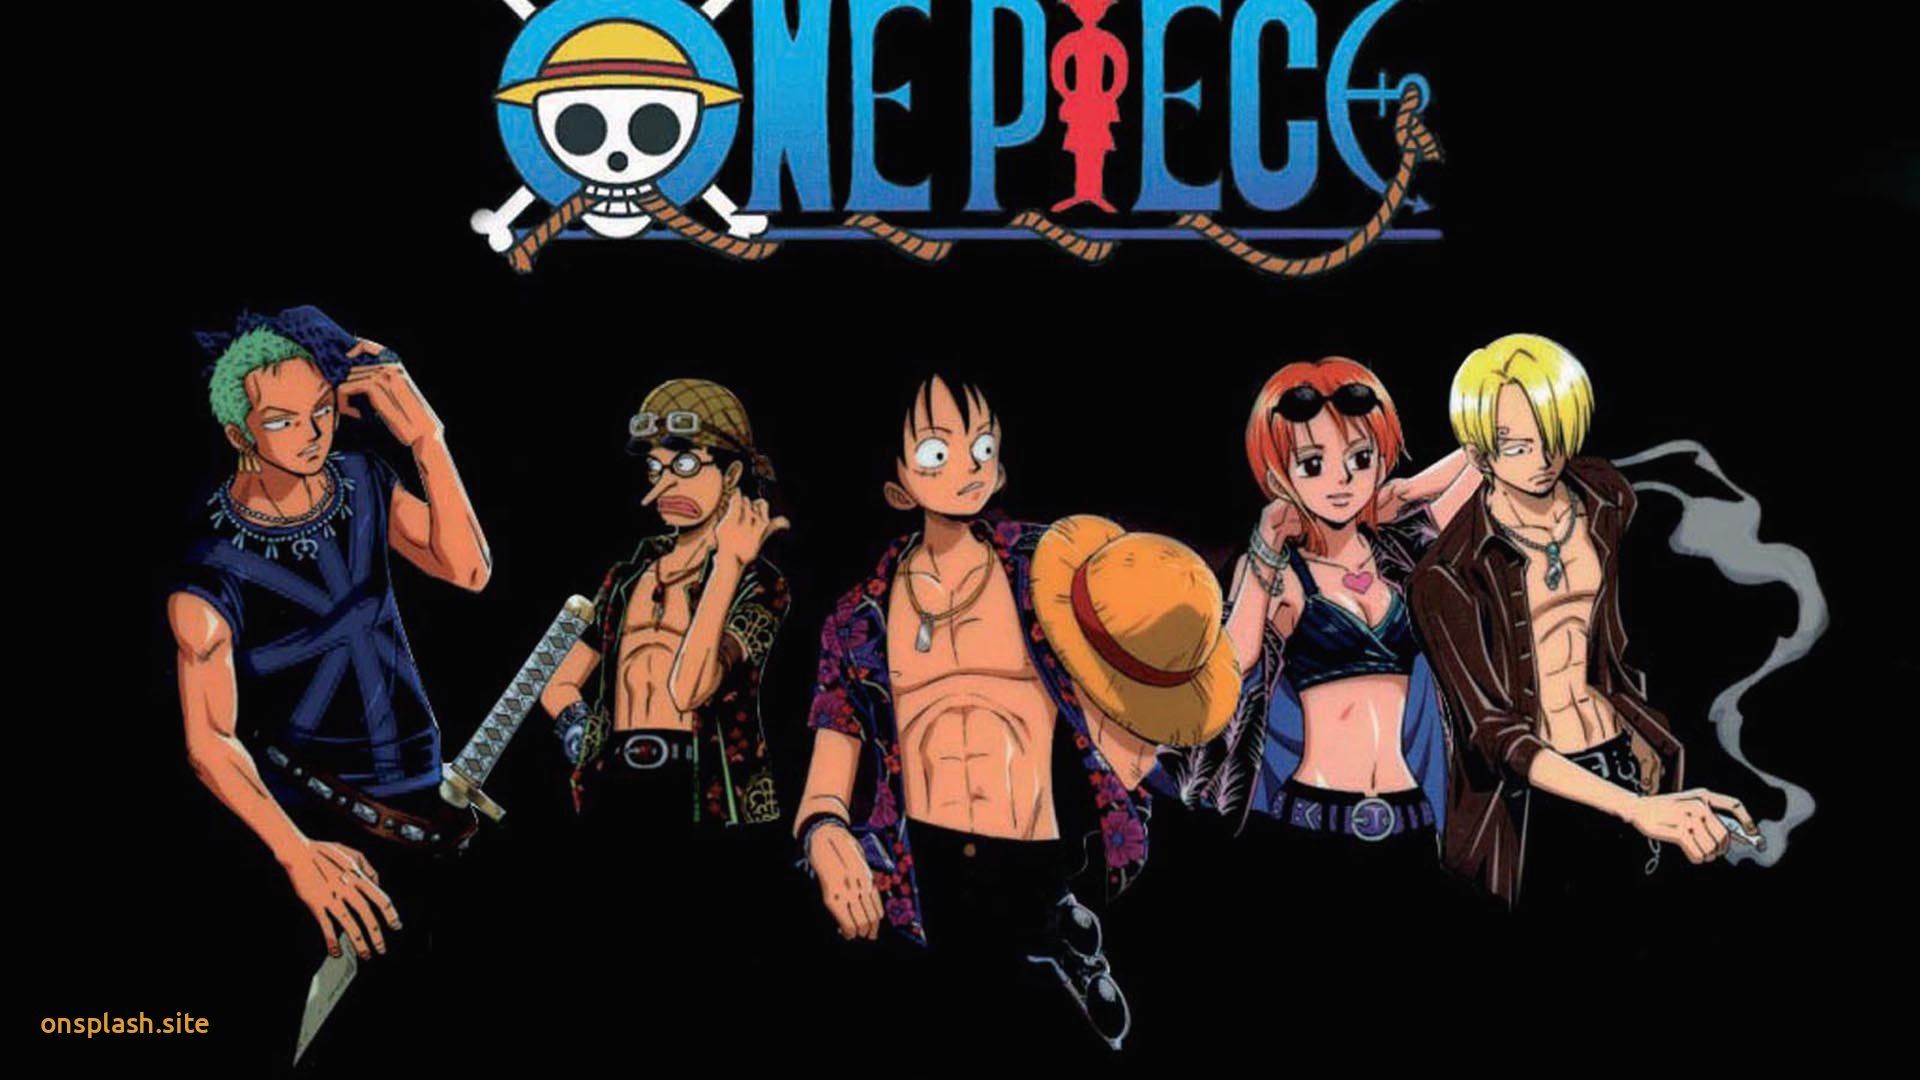 Awesome 93 One Piece Wallpaper 4k Desk×1080